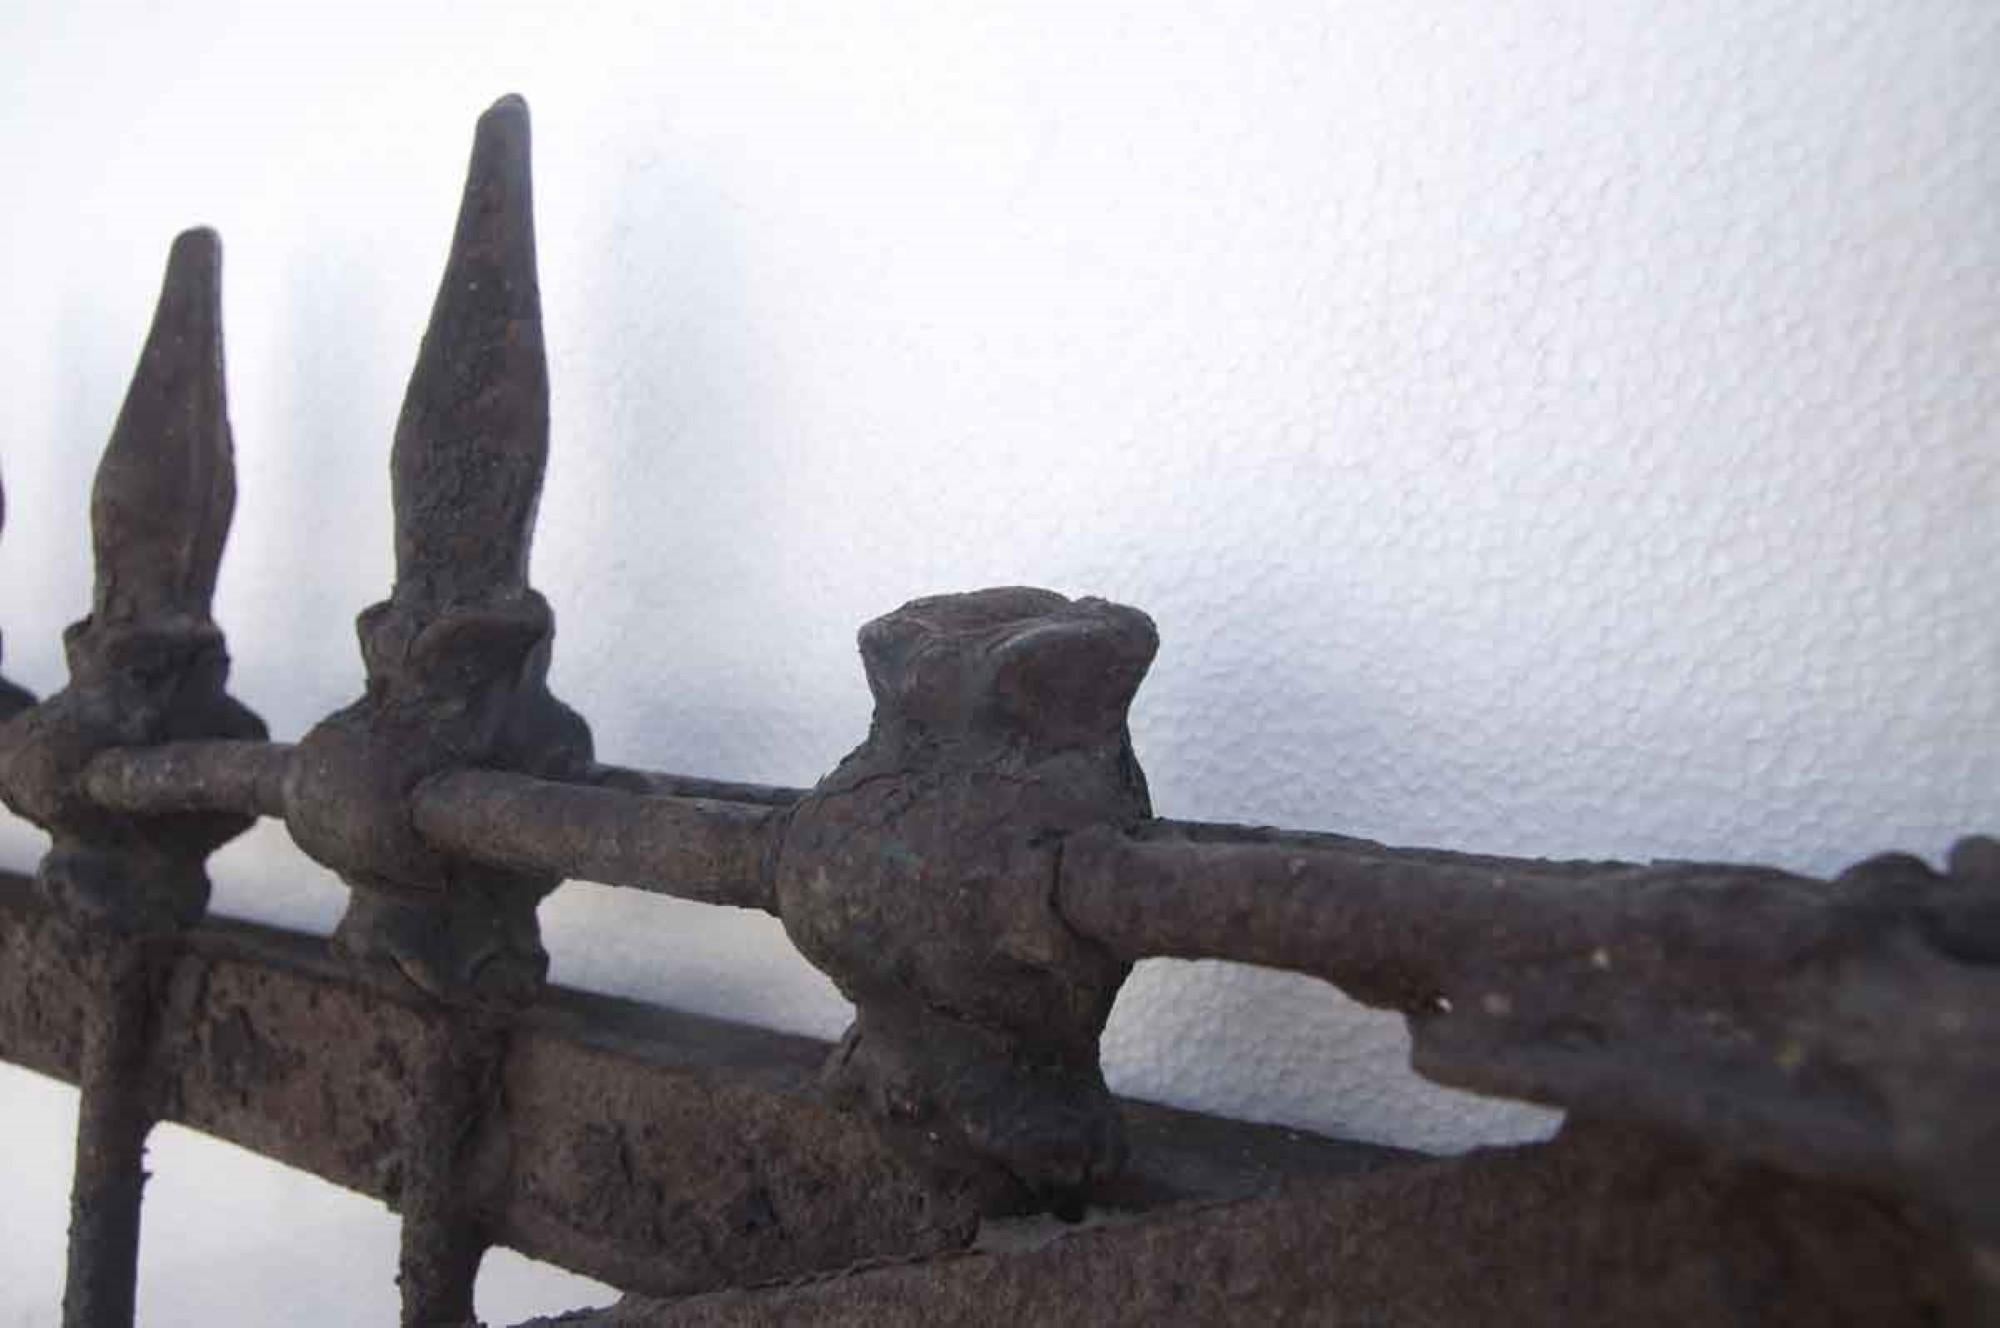 American 1800s Pair of Forged and Wrought Iron Driveway or Garden Gates